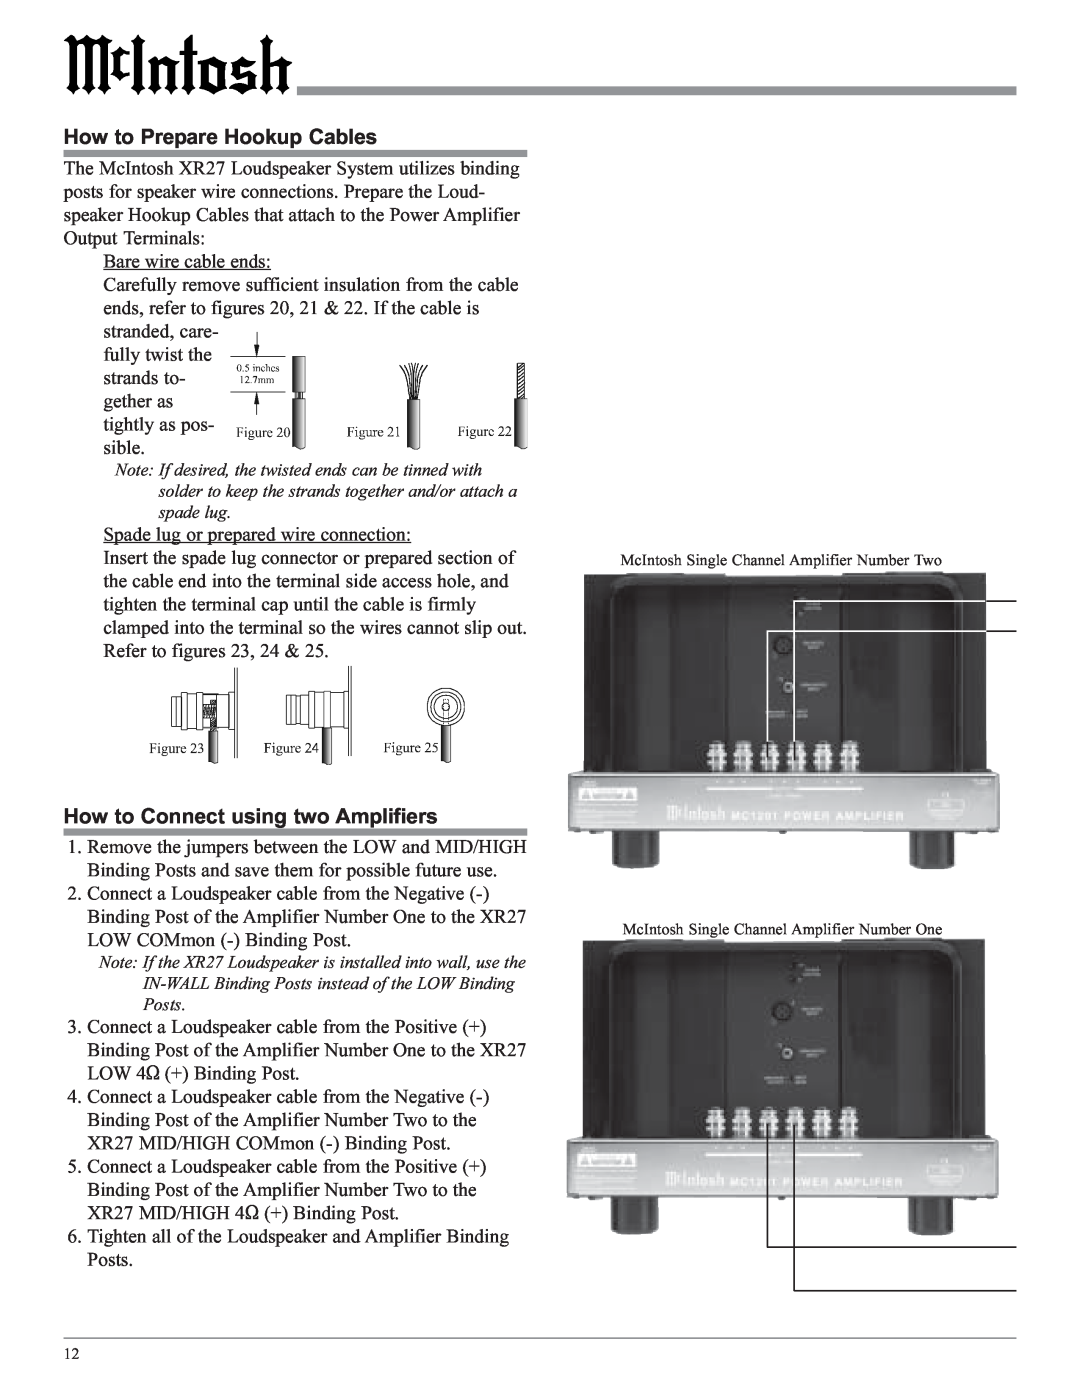 McIntosh XR27 owner manual How to Connect using two Amplifiers, How to Prepare Hookup Cables 